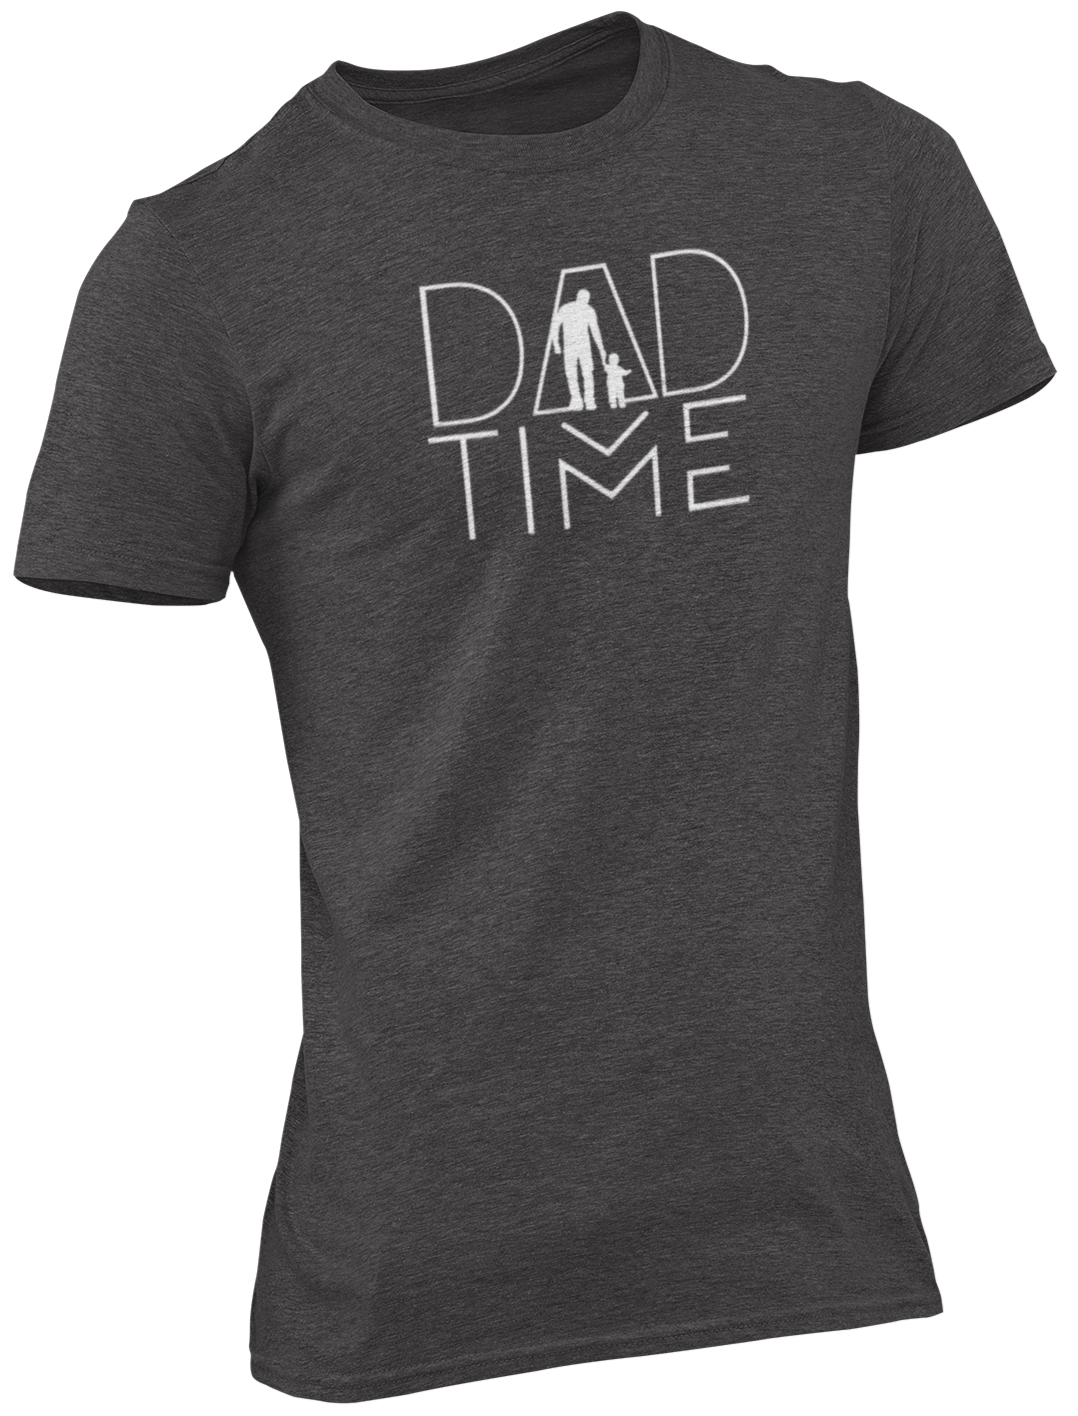 Dad Time Tee - DT120